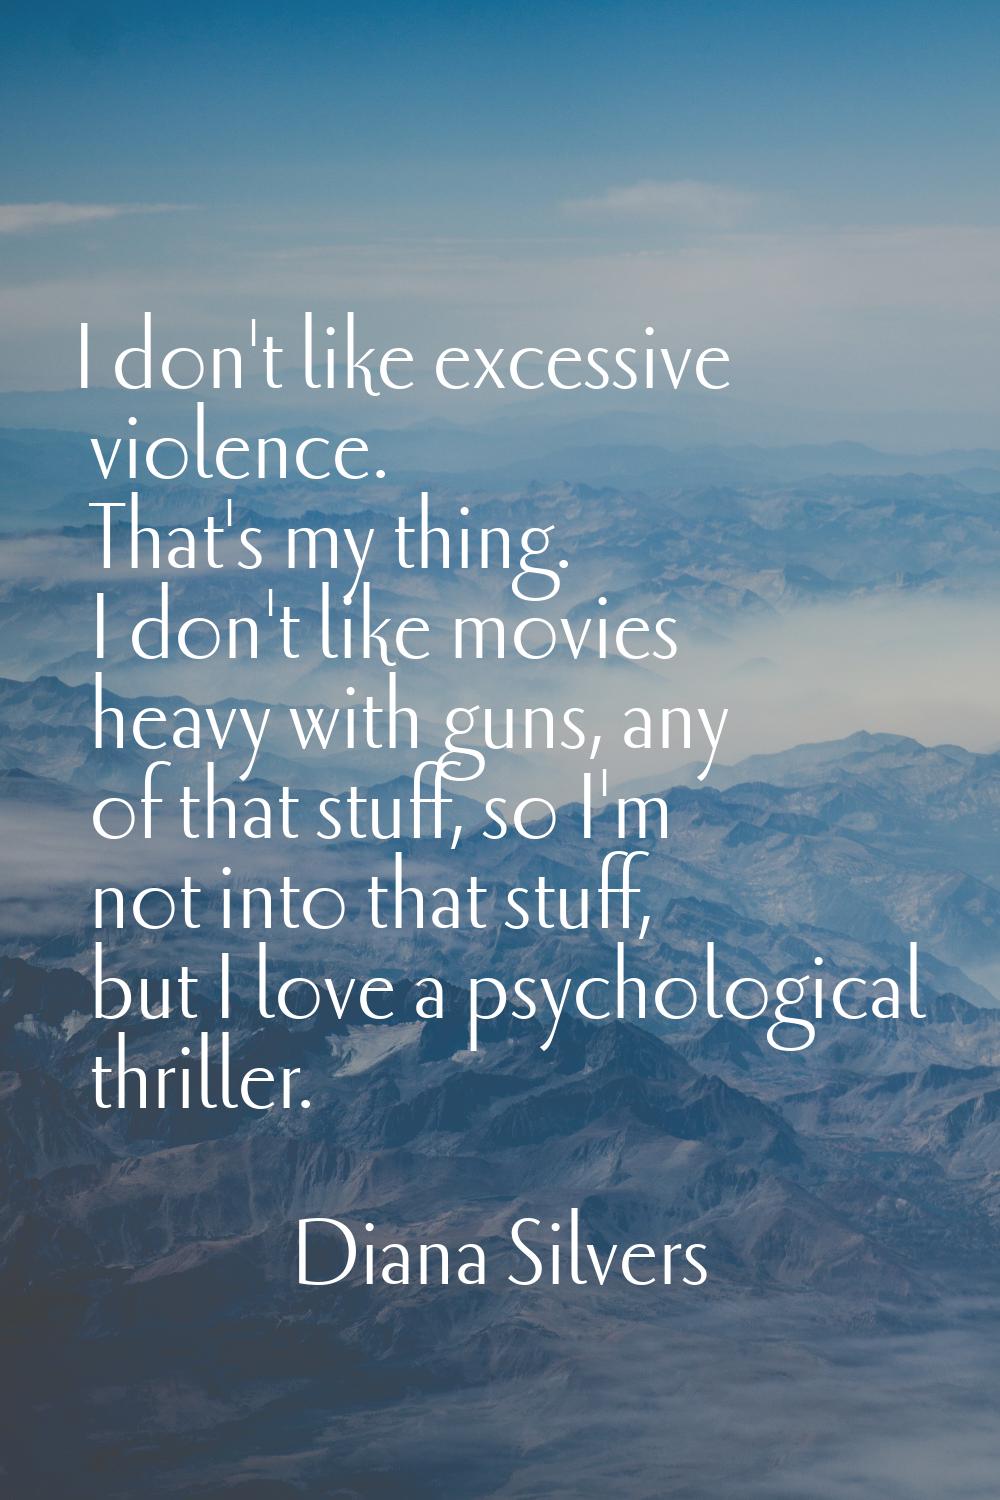 I don't like excessive violence. That's my thing. I don't like movies heavy with guns, any of that 